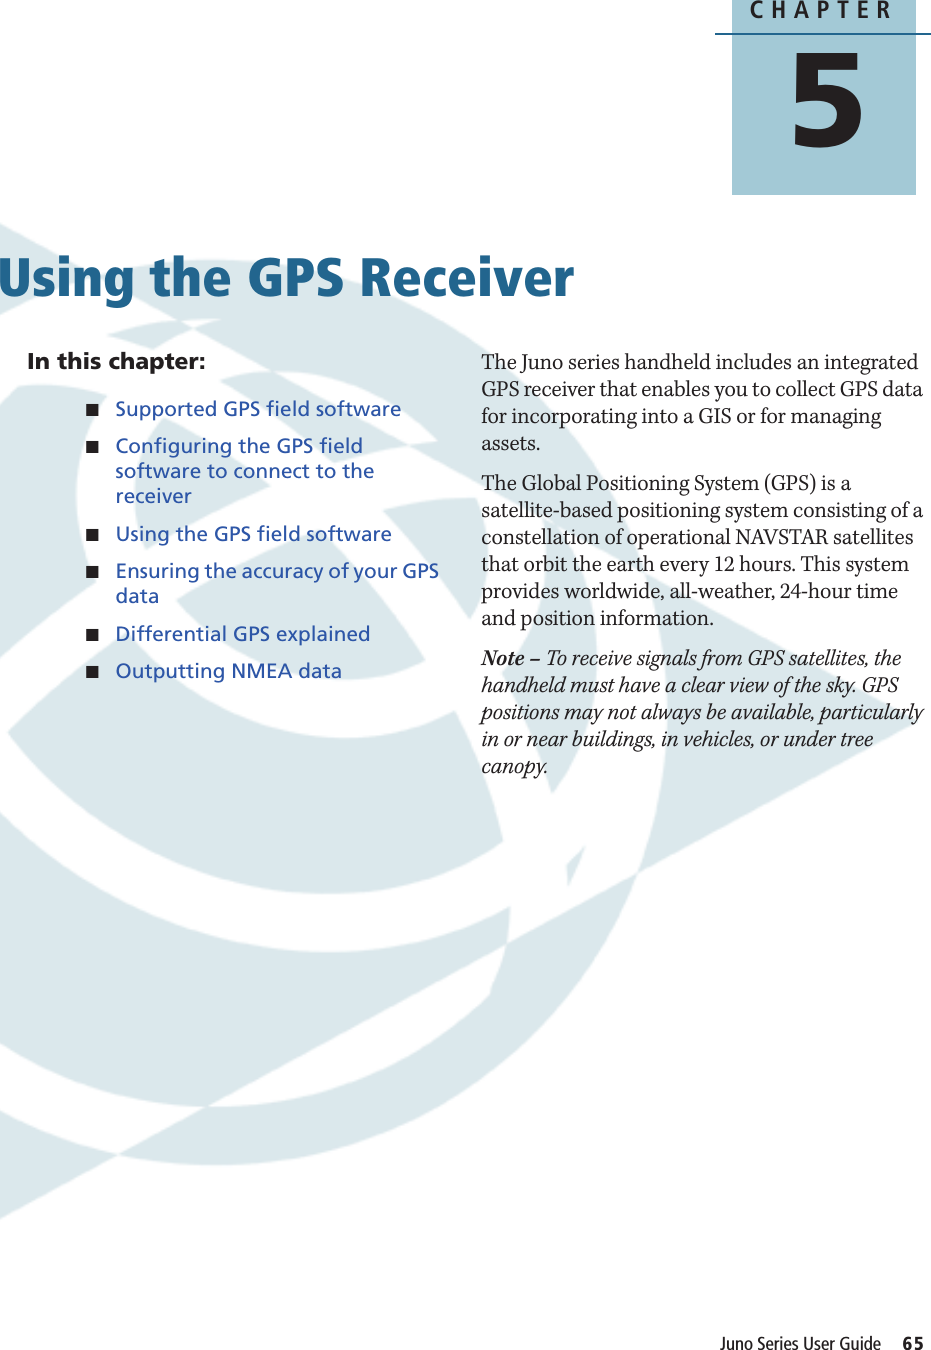 CHAPTER5Juno Series User Guide     65Using the GPS Receiver 5In this chapter:QSupported GPS field softwareQConfiguring the GPS field software to connect to the receiverQUsing the GPS field softwareQEnsuring the accuracy of your GPS dataQDifferential GPS explainedQOutputting NMEA dataThe Juno series handheld includes an integrated GPS receiver that enables you to collect GPS data for incorporating into a GIS or for managing assets.The Global Positioning System (GPS) is a satellite-based positioning system consisting of a constellation of operational NAVSTAR satellites that orbit the earth every 12 hours. This system provides worldwide, all-weather, 24-hour time and position information. Note – To receive signals from GPS satellites, the handheld must have a clear view of the sky. GPS positions may not always be available, particularly in or near buildings, in vehicles, or under tree canopy.